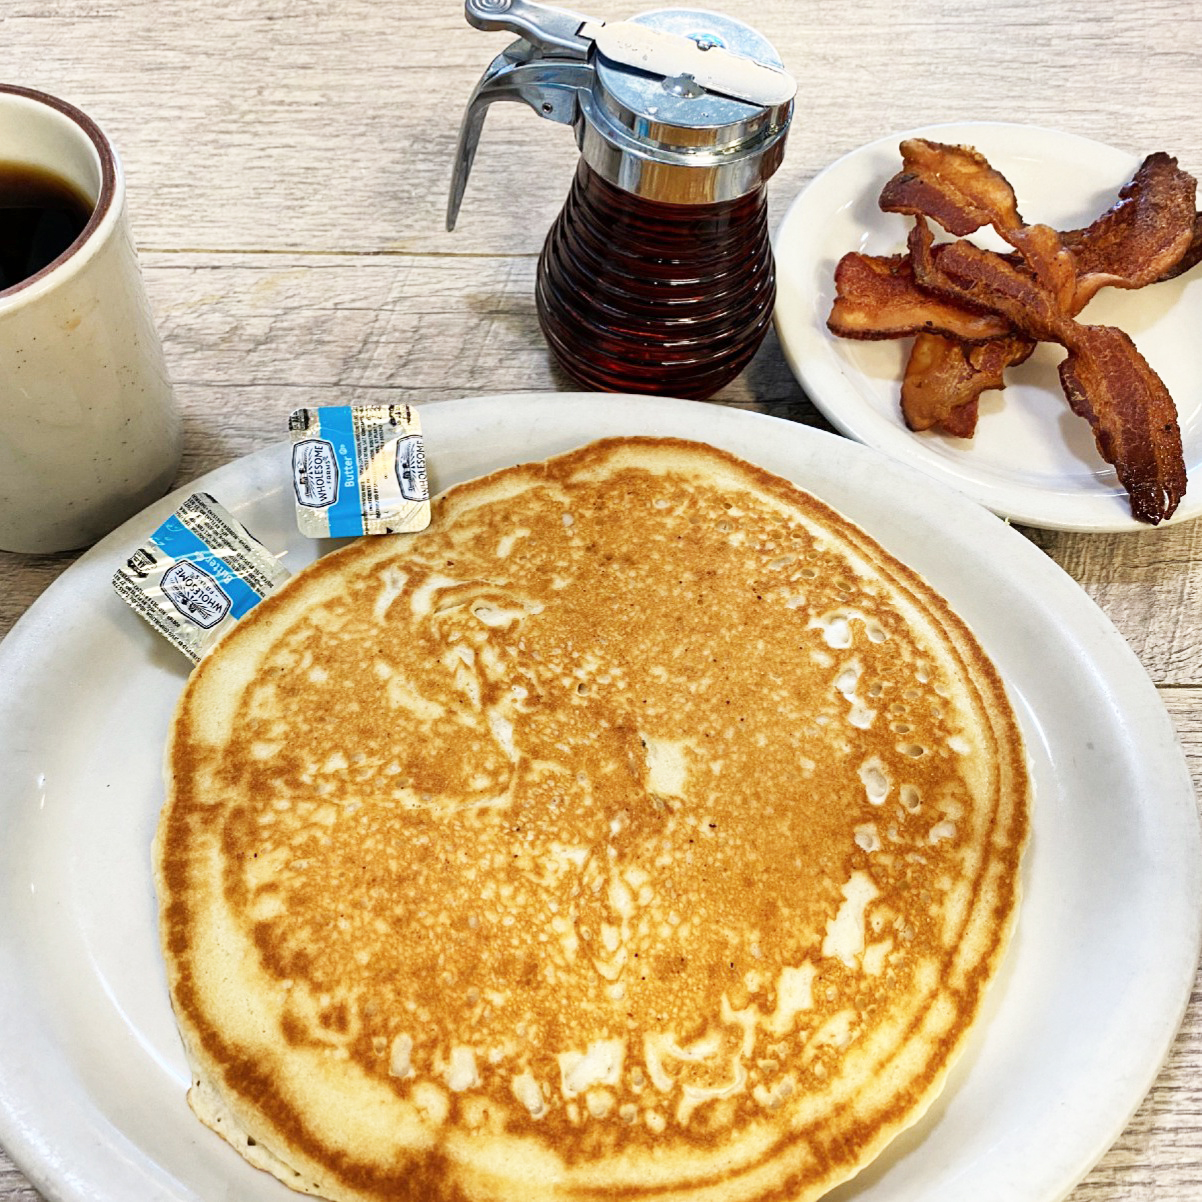 pancakes, next to bacon, syrup and coffee